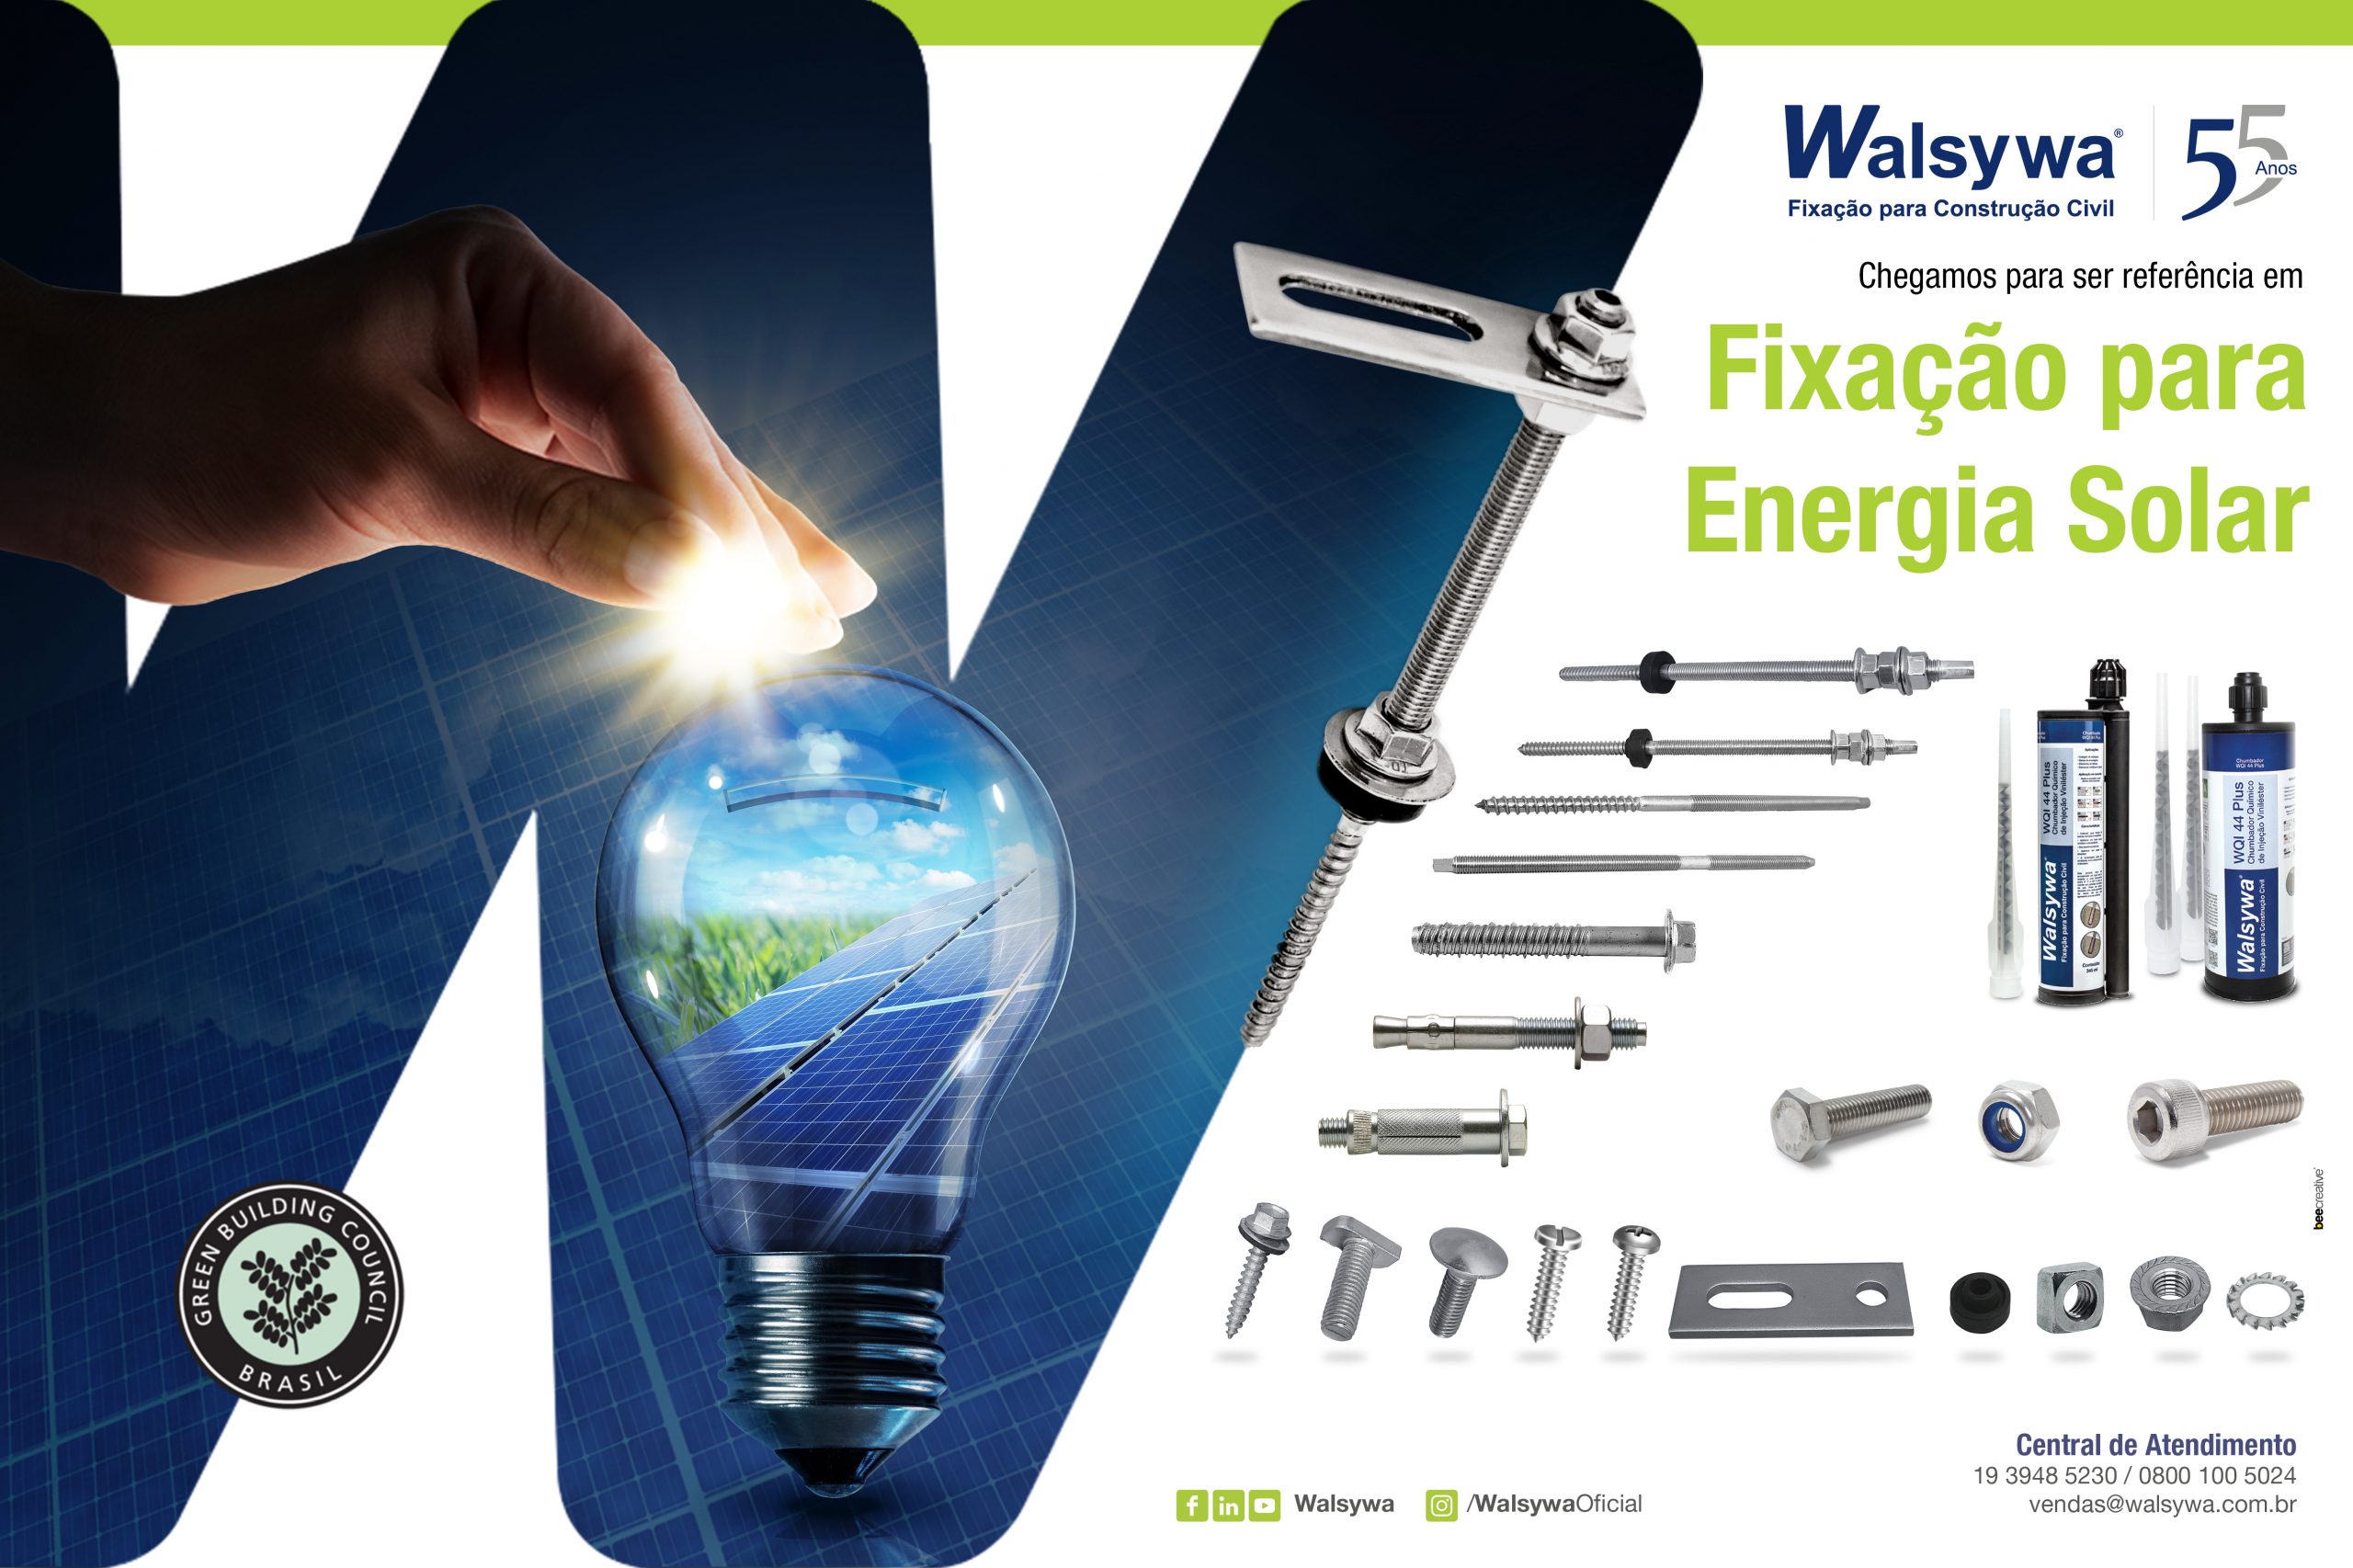 We have arrived to be a reference in Fastening for Solar Energy– RBS  Magazine - Walsywa